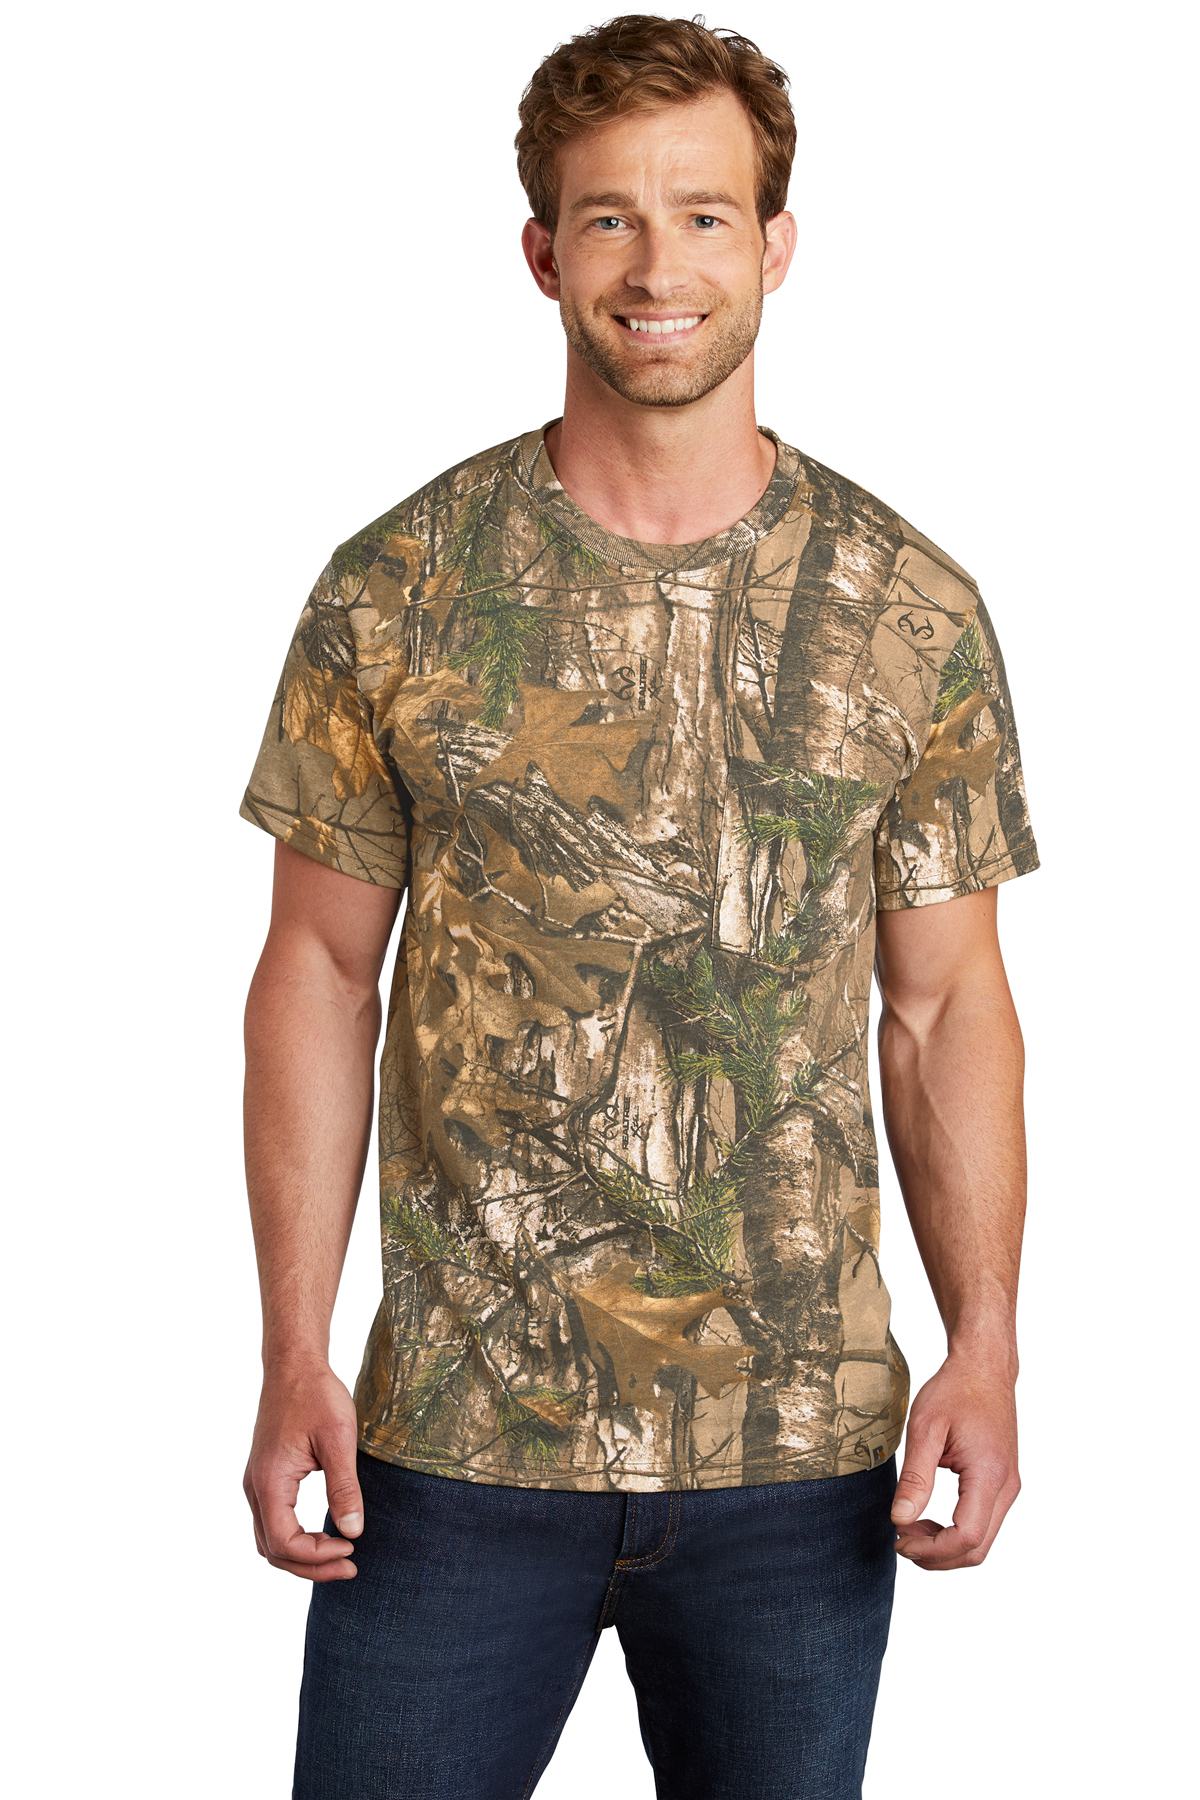 Details about   Mens XL Realtree Camo T-shirts 100% Cotton Camouflage Hunter Russell Outdoors 